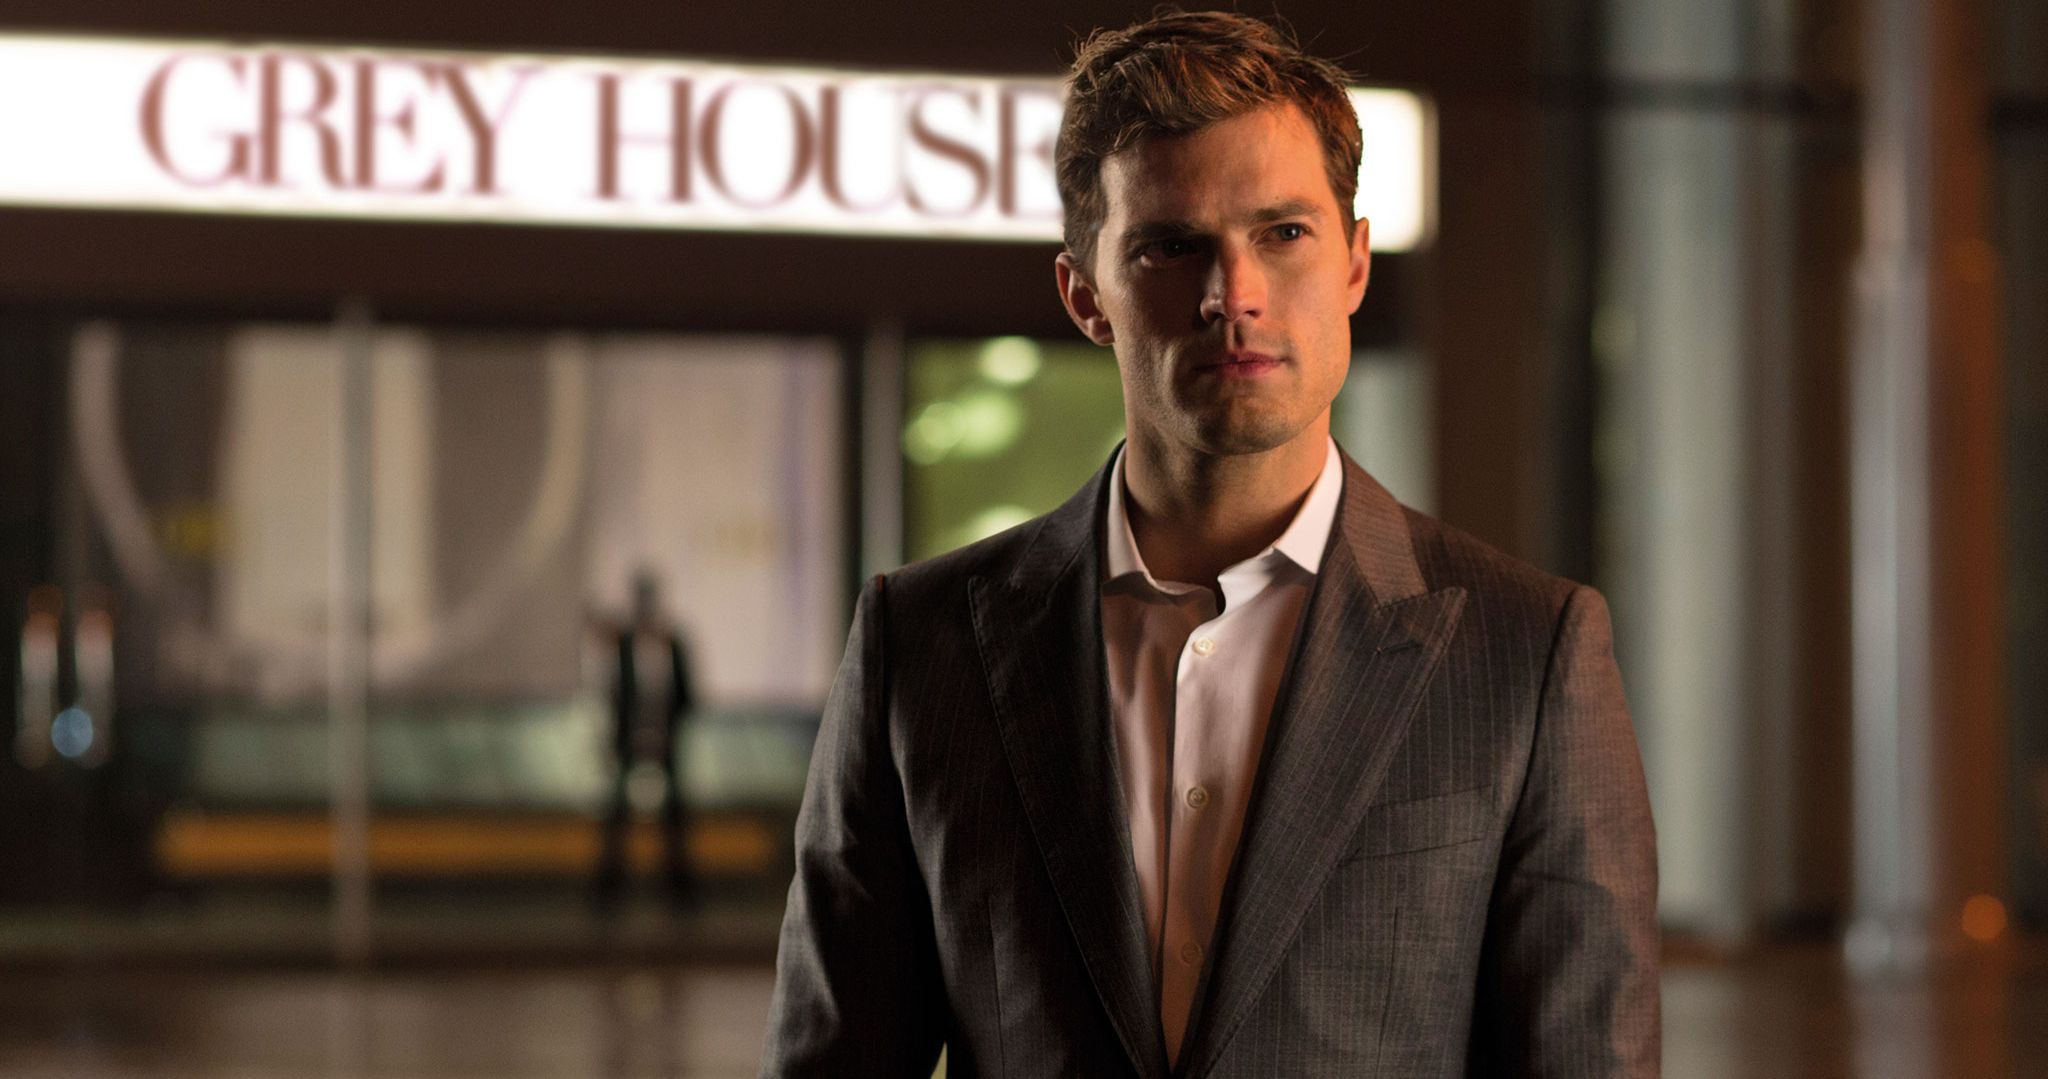 Jamie Dornan Has No Regrets About Starring in Fifty Shades of Grey